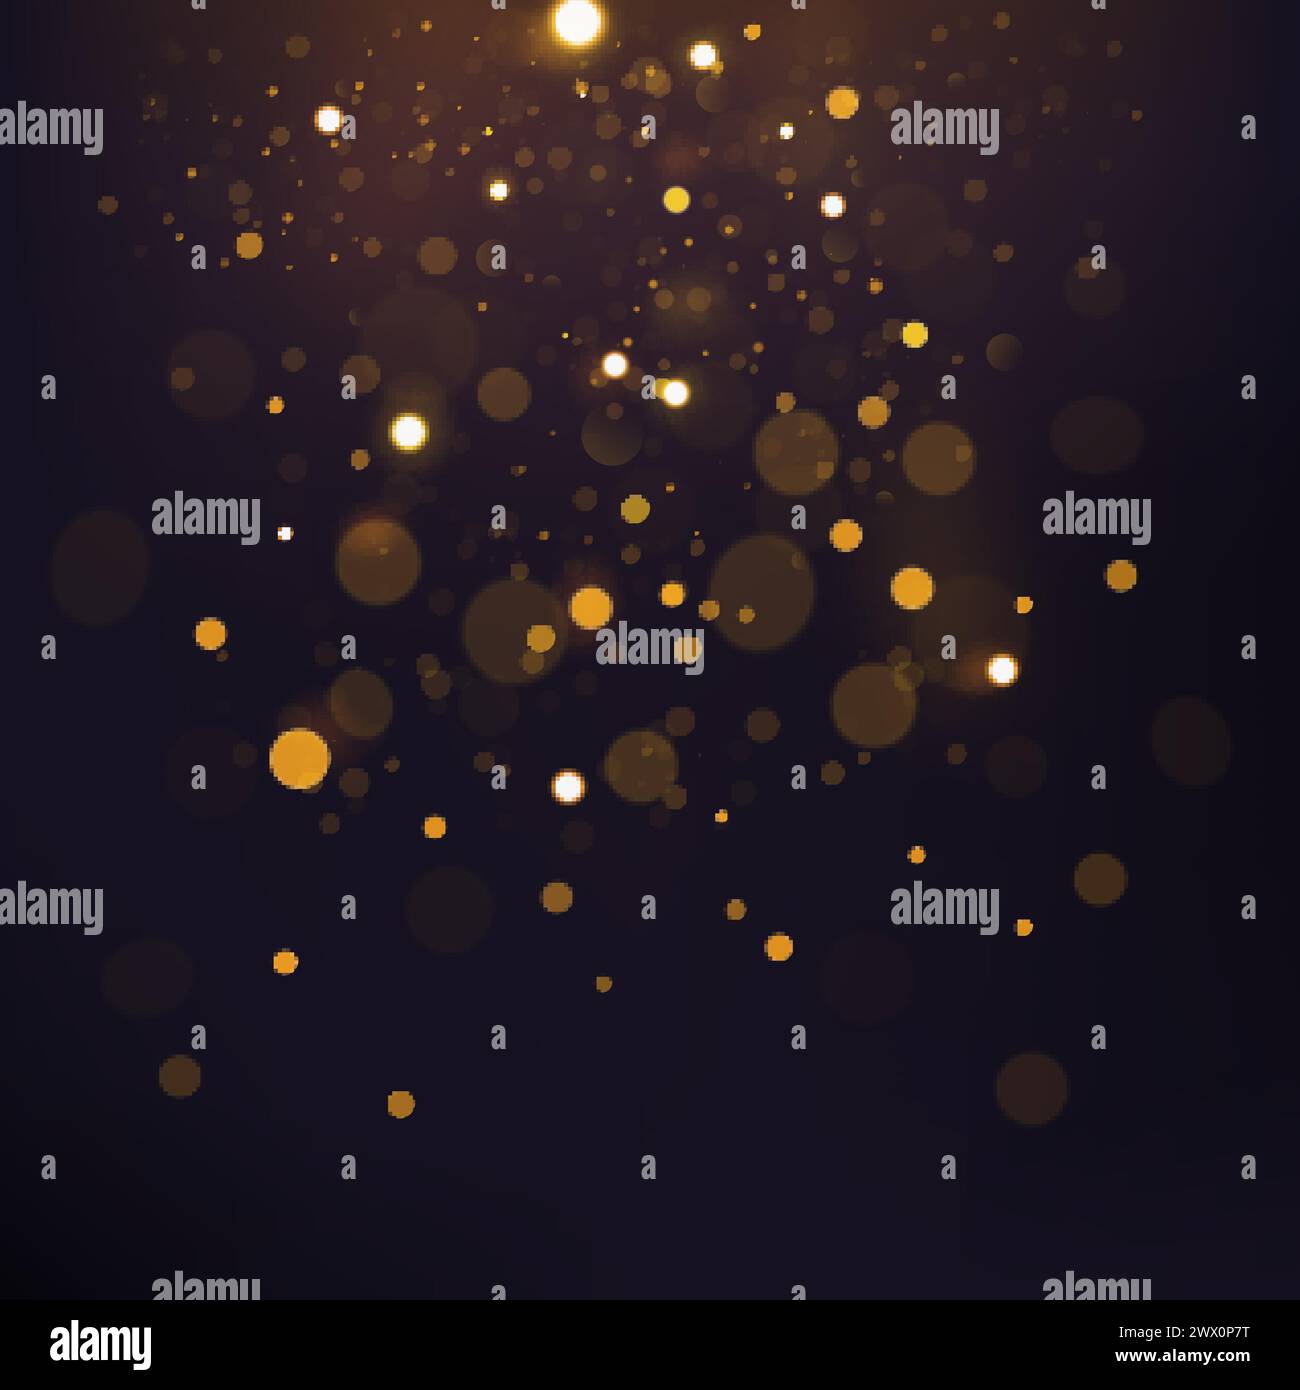 Abstract Gold bokeh scattered, versione widescreen, illustrazione vettoriale Illustrazione Vettoriale